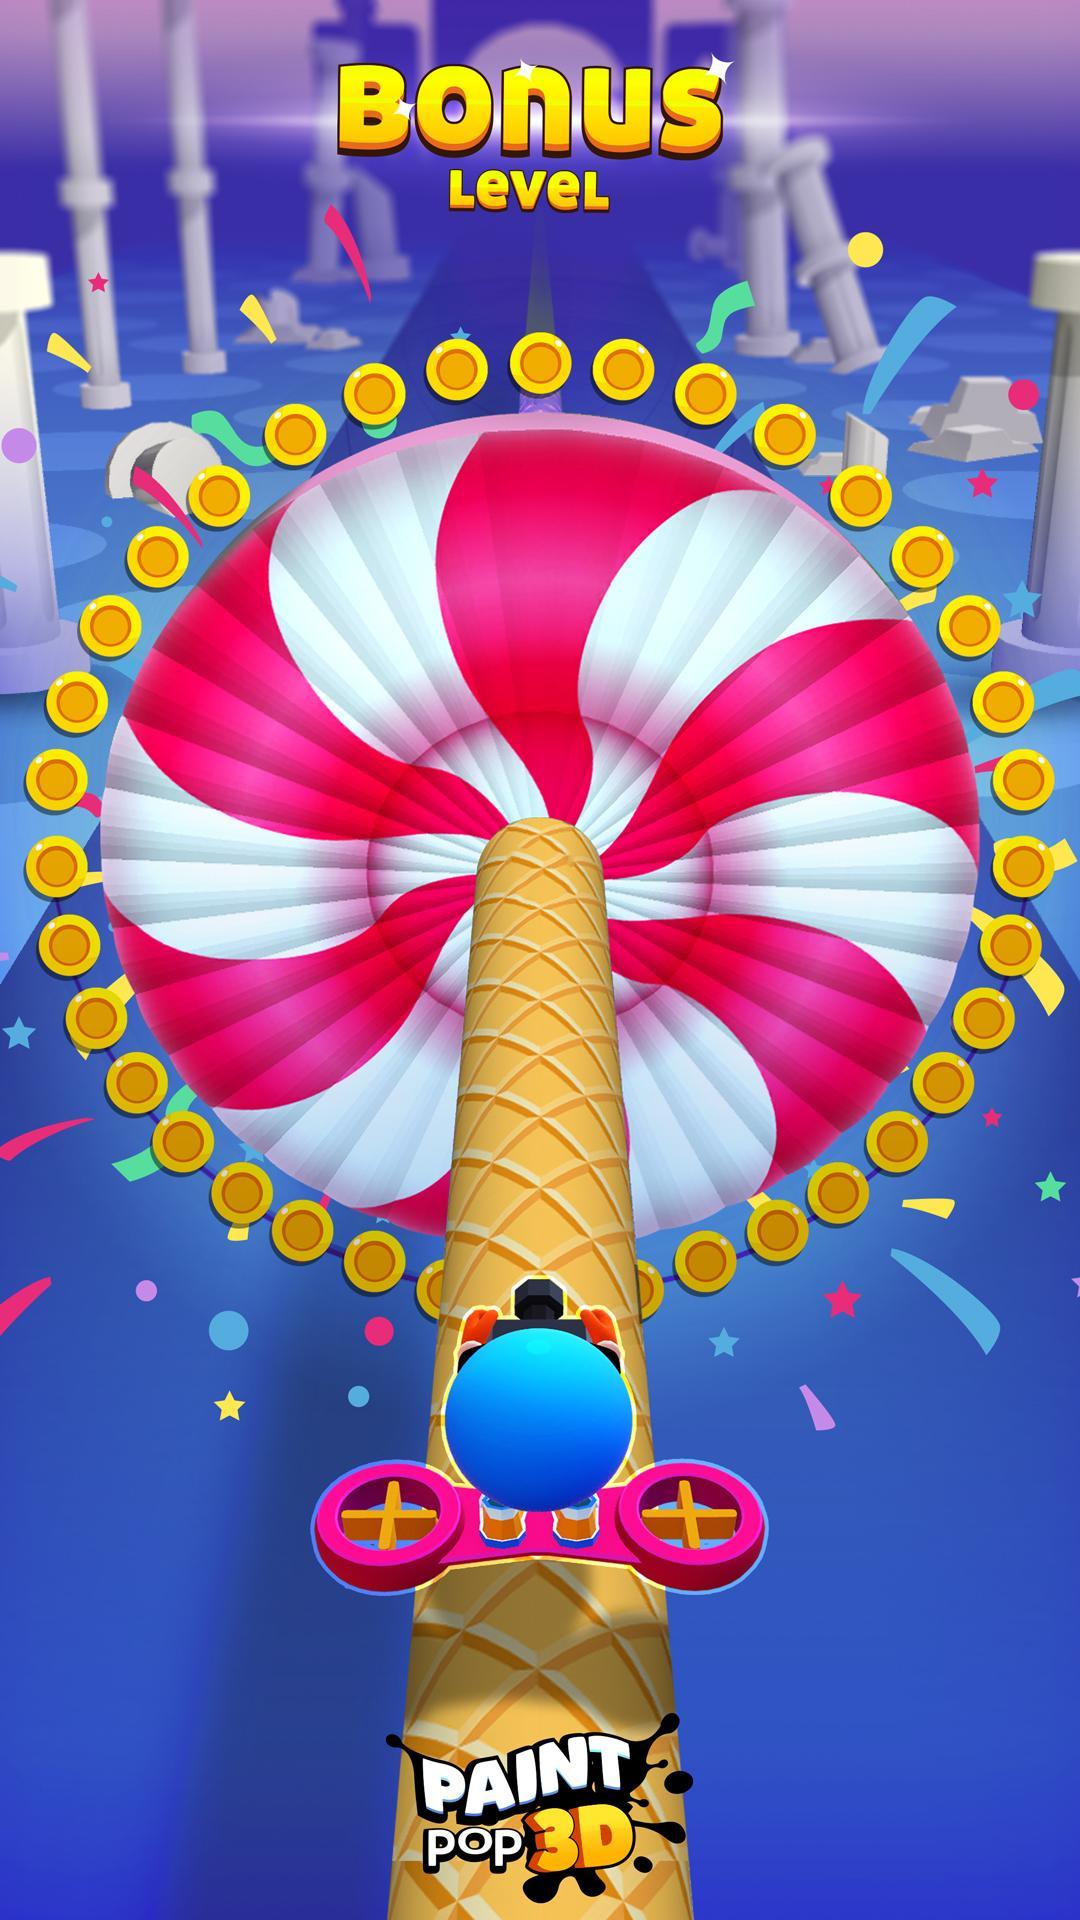 Paint Pop 3D for Android - APK Download